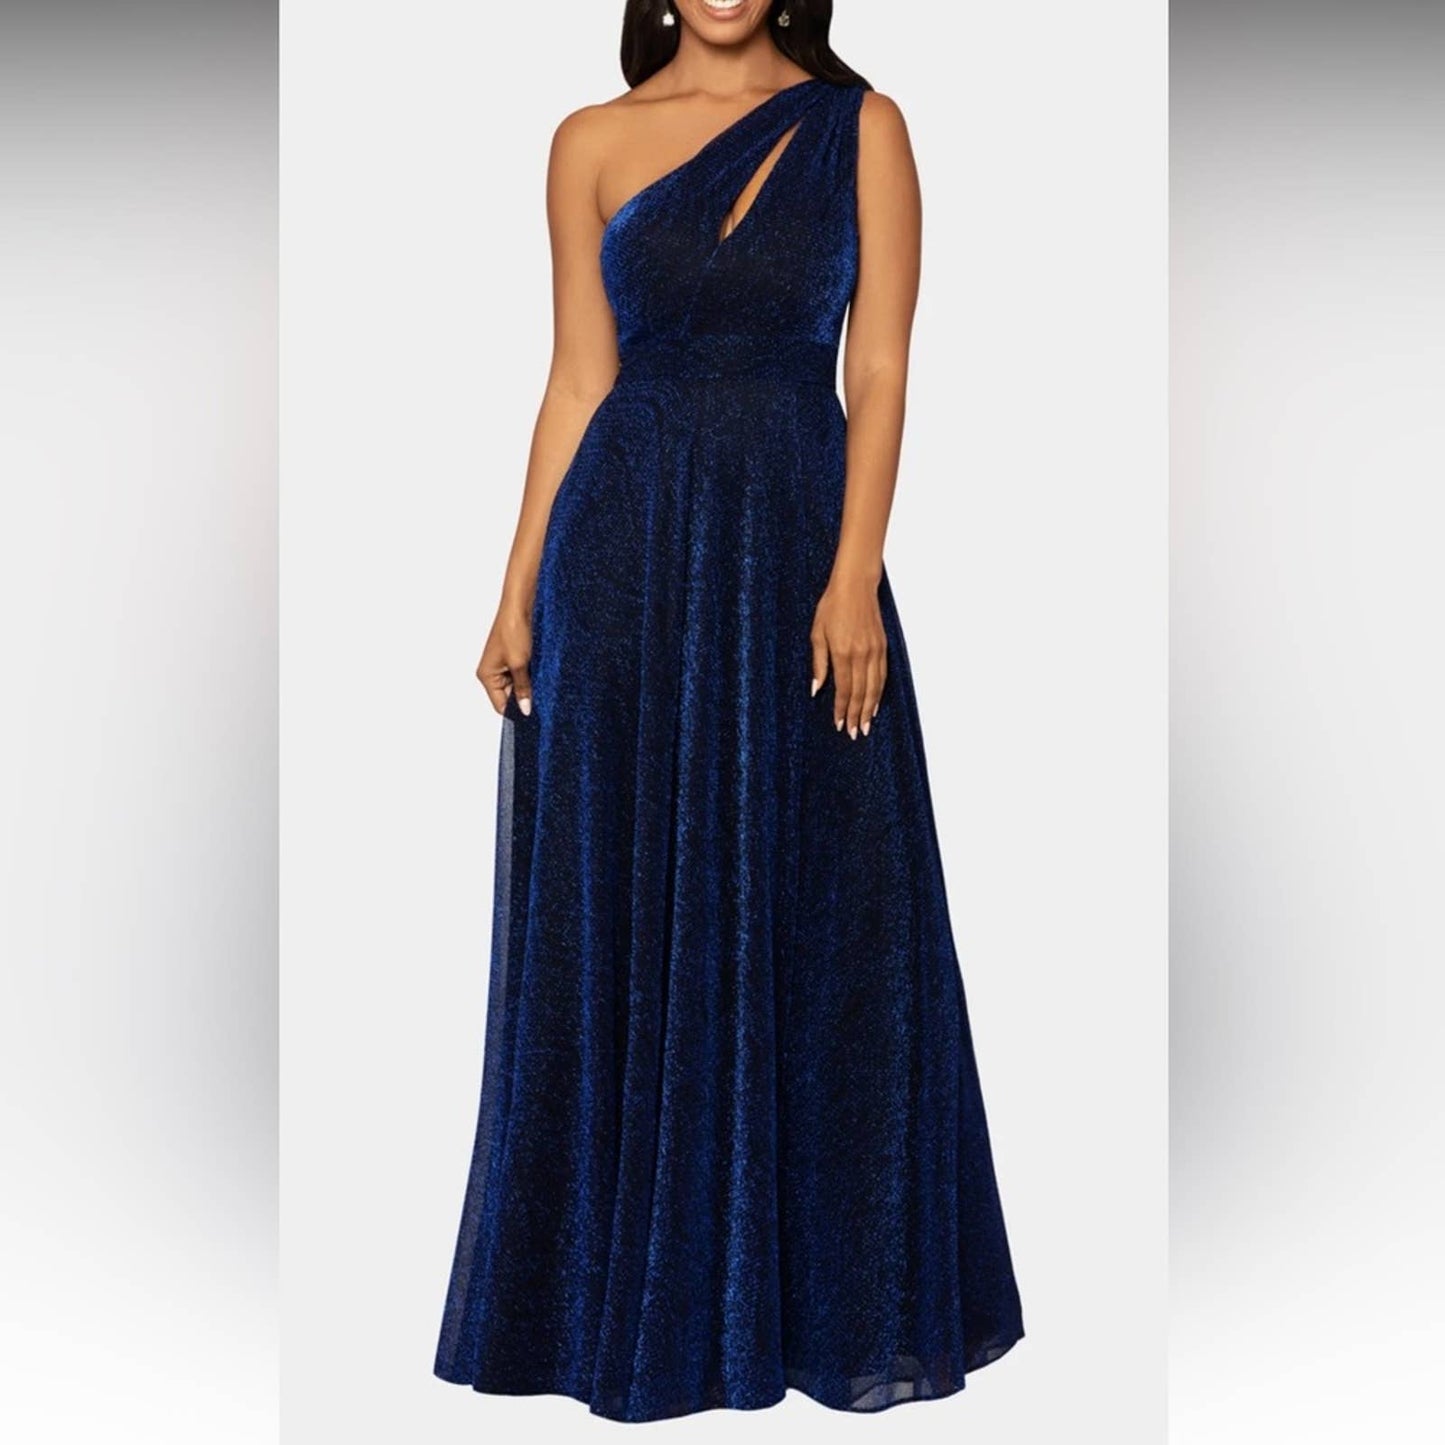 Betsy & Adam Ladies Royal Blue Shimmer One Shoulder Cutout Gown, Size 8, NWT!